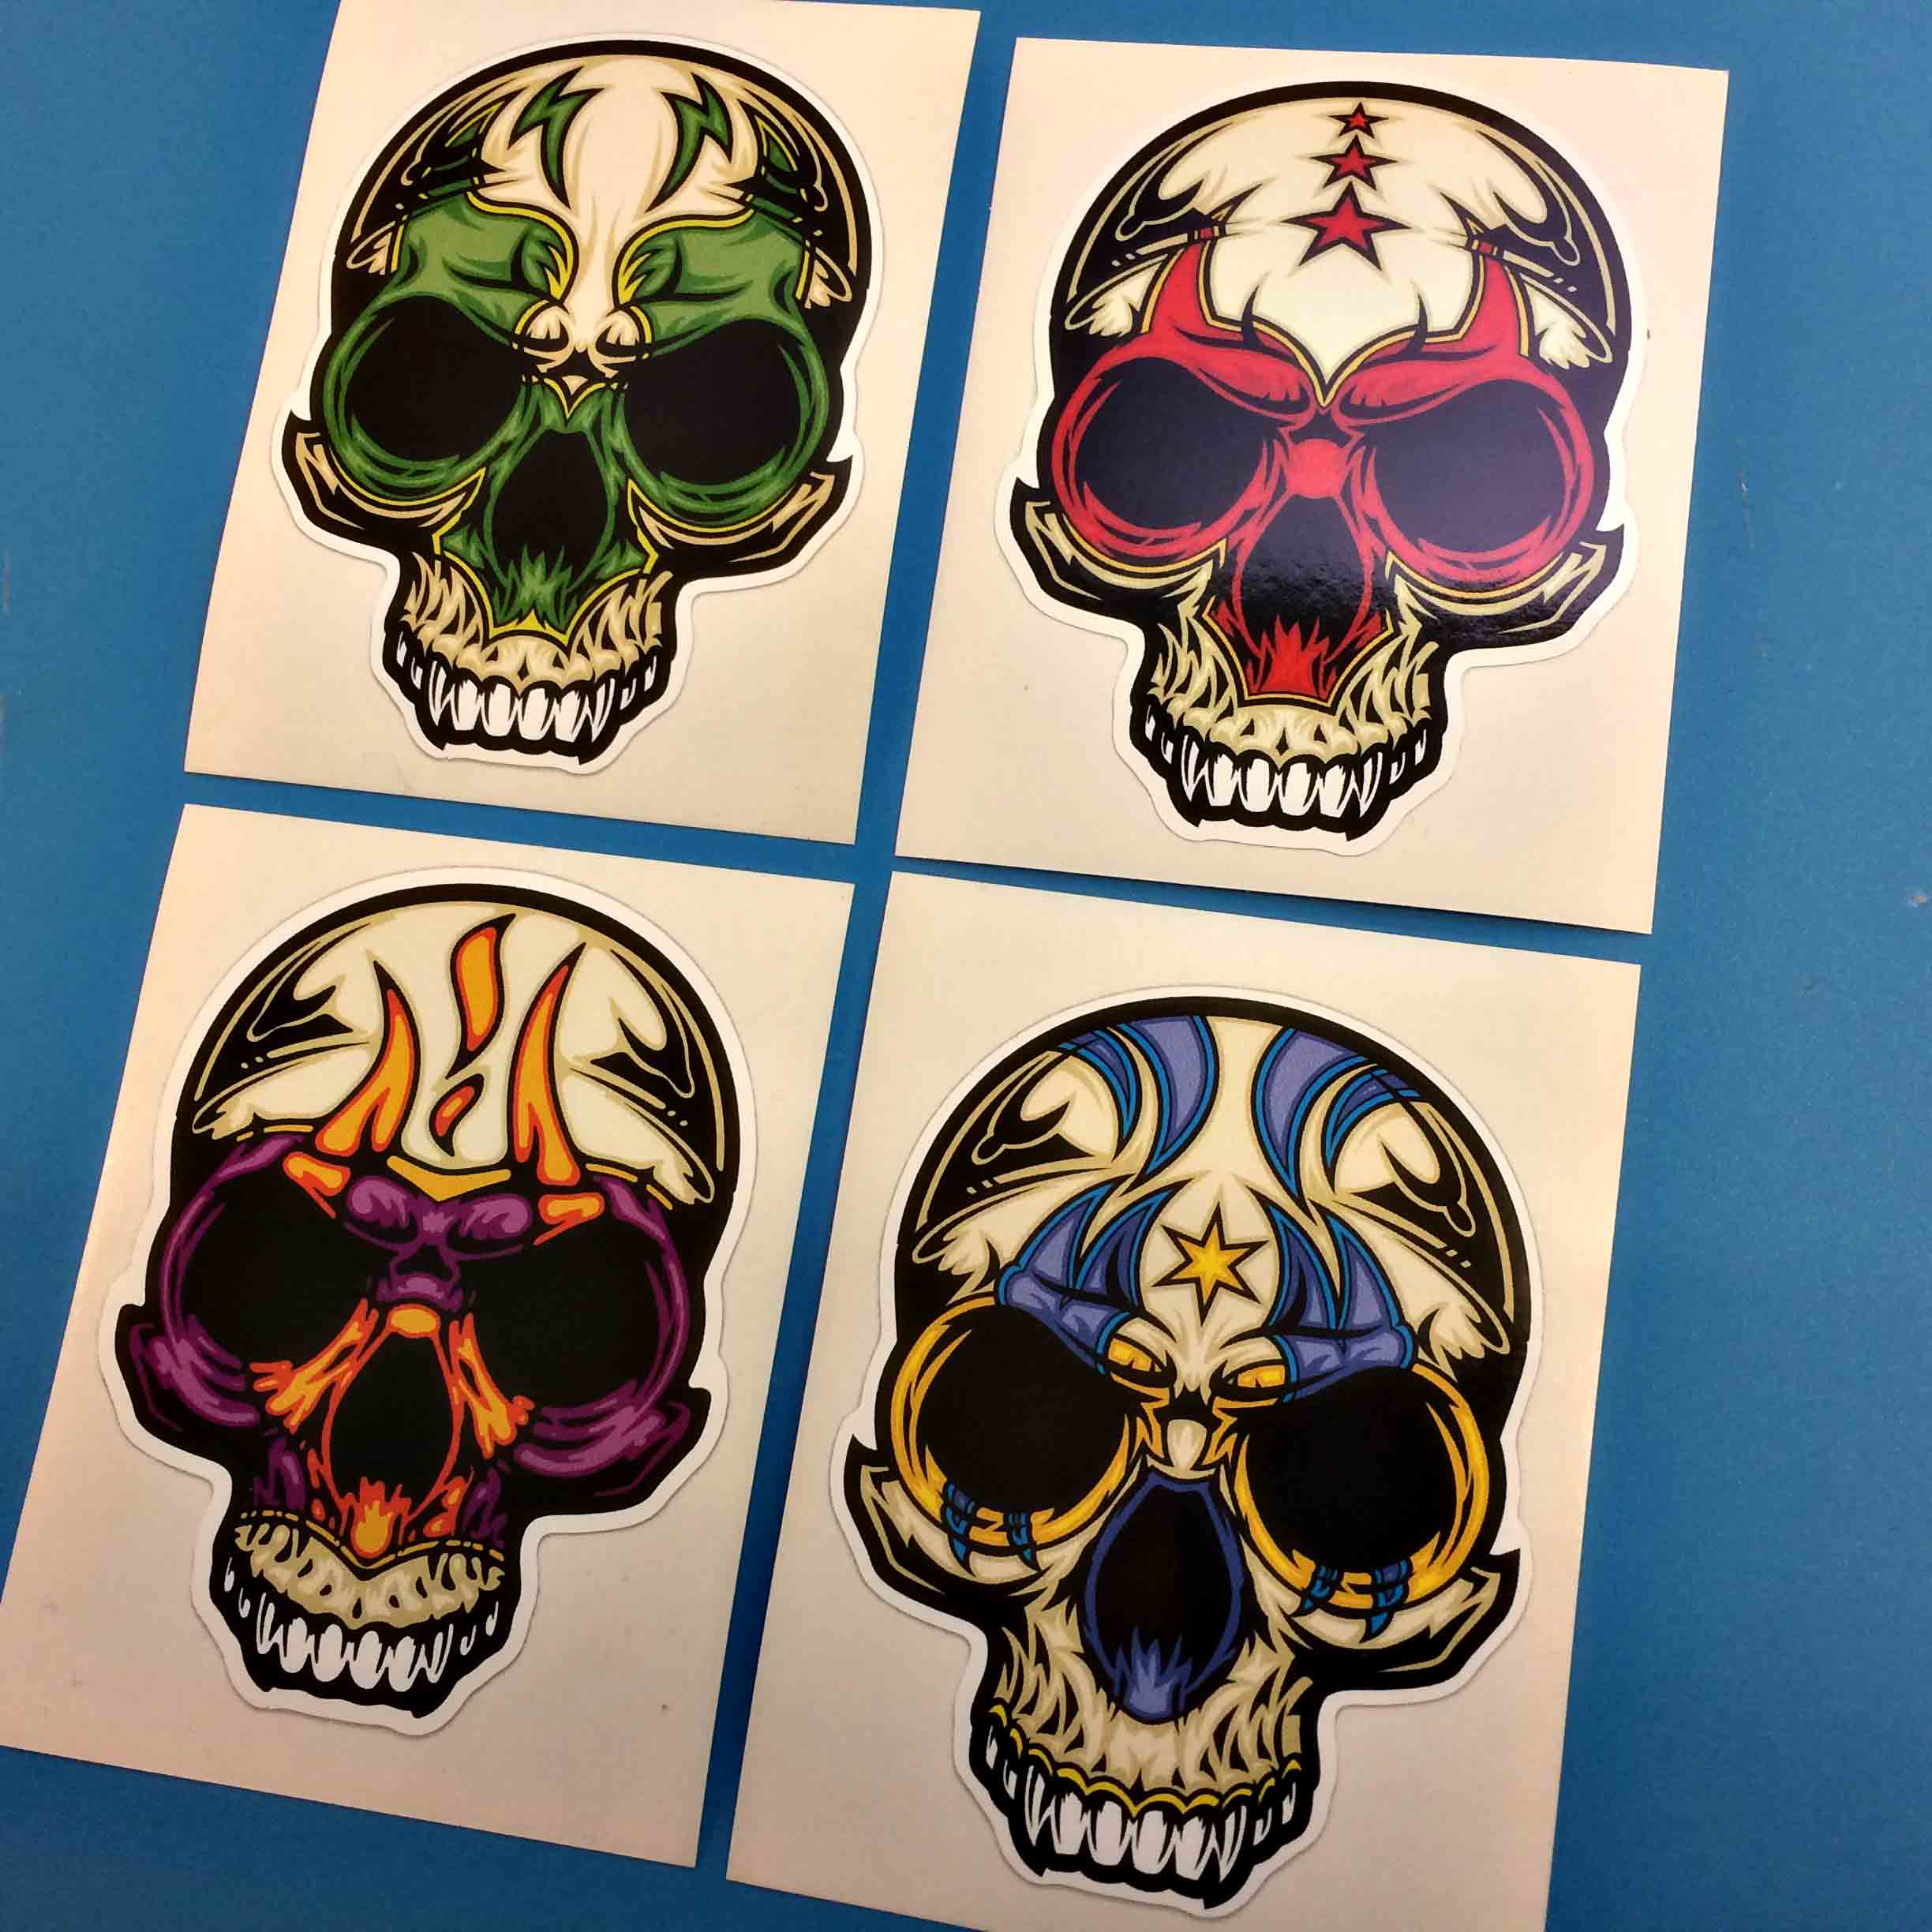 DAY OF THE DEAD STICKERS. A skull with white teeth. The eye socket area is either blue, green, purple or red.